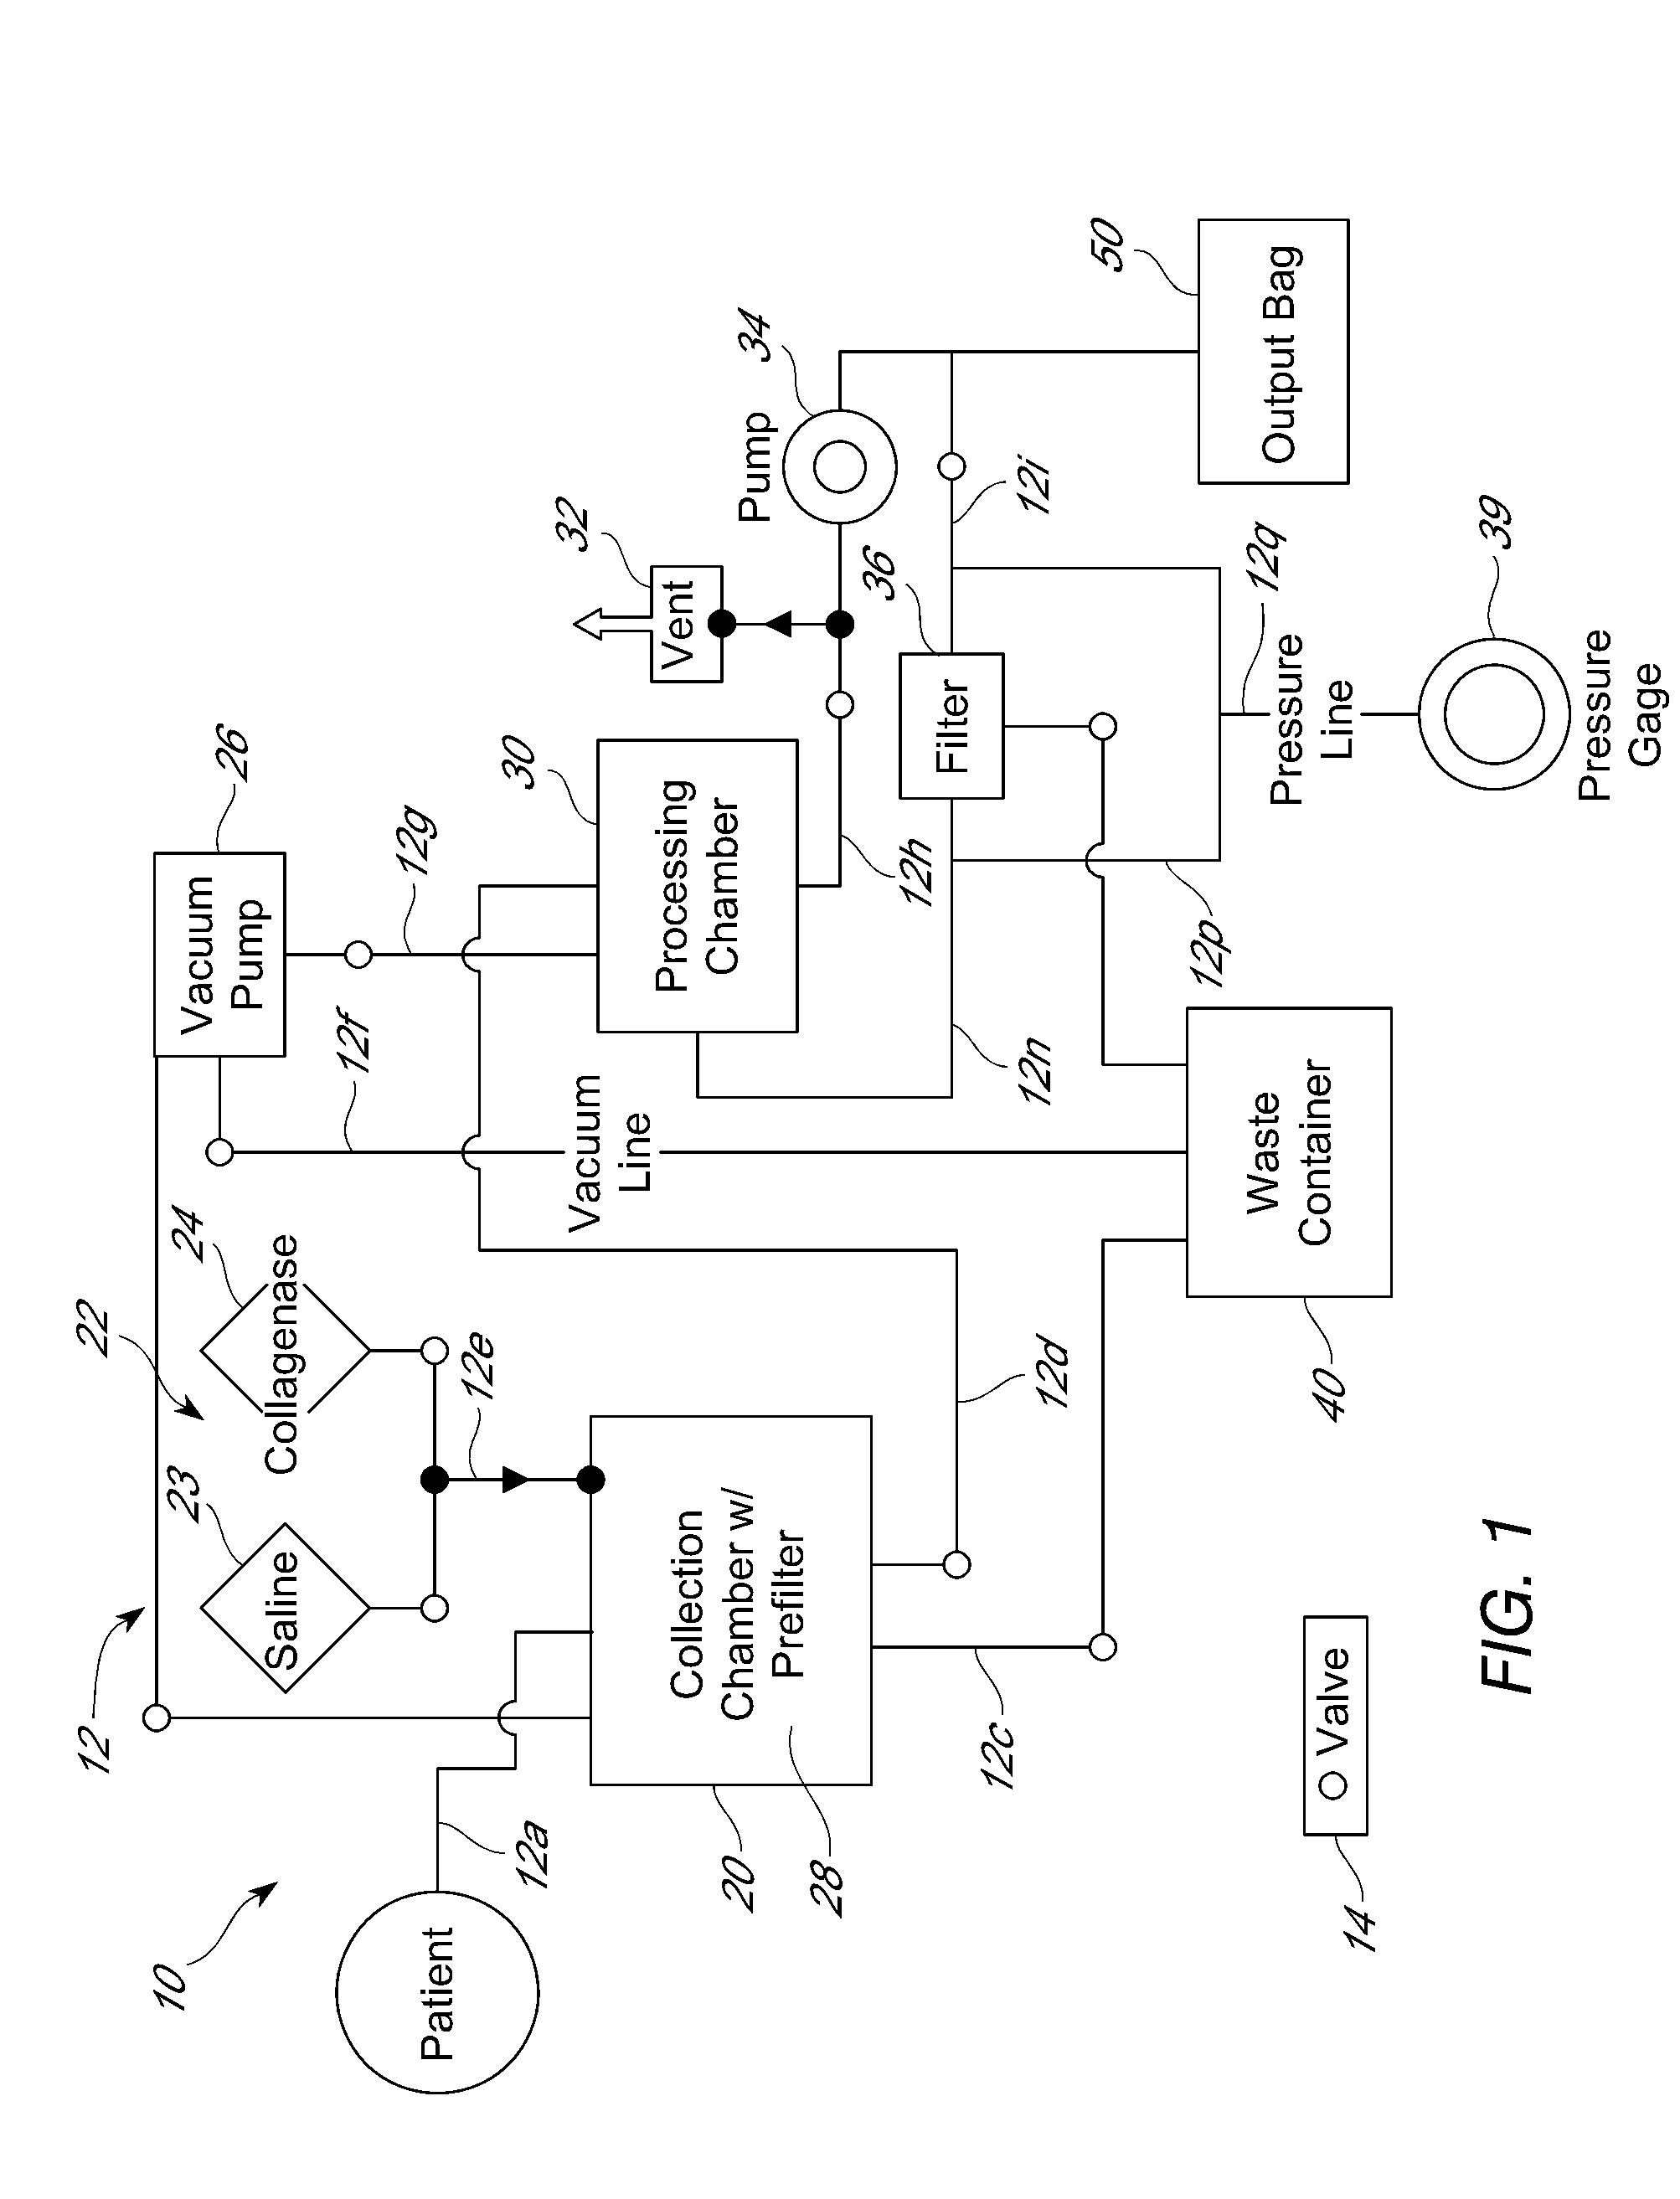 Methods of using adipose tissue-derived cells in the treatment of the lymphatic system and malignant disease